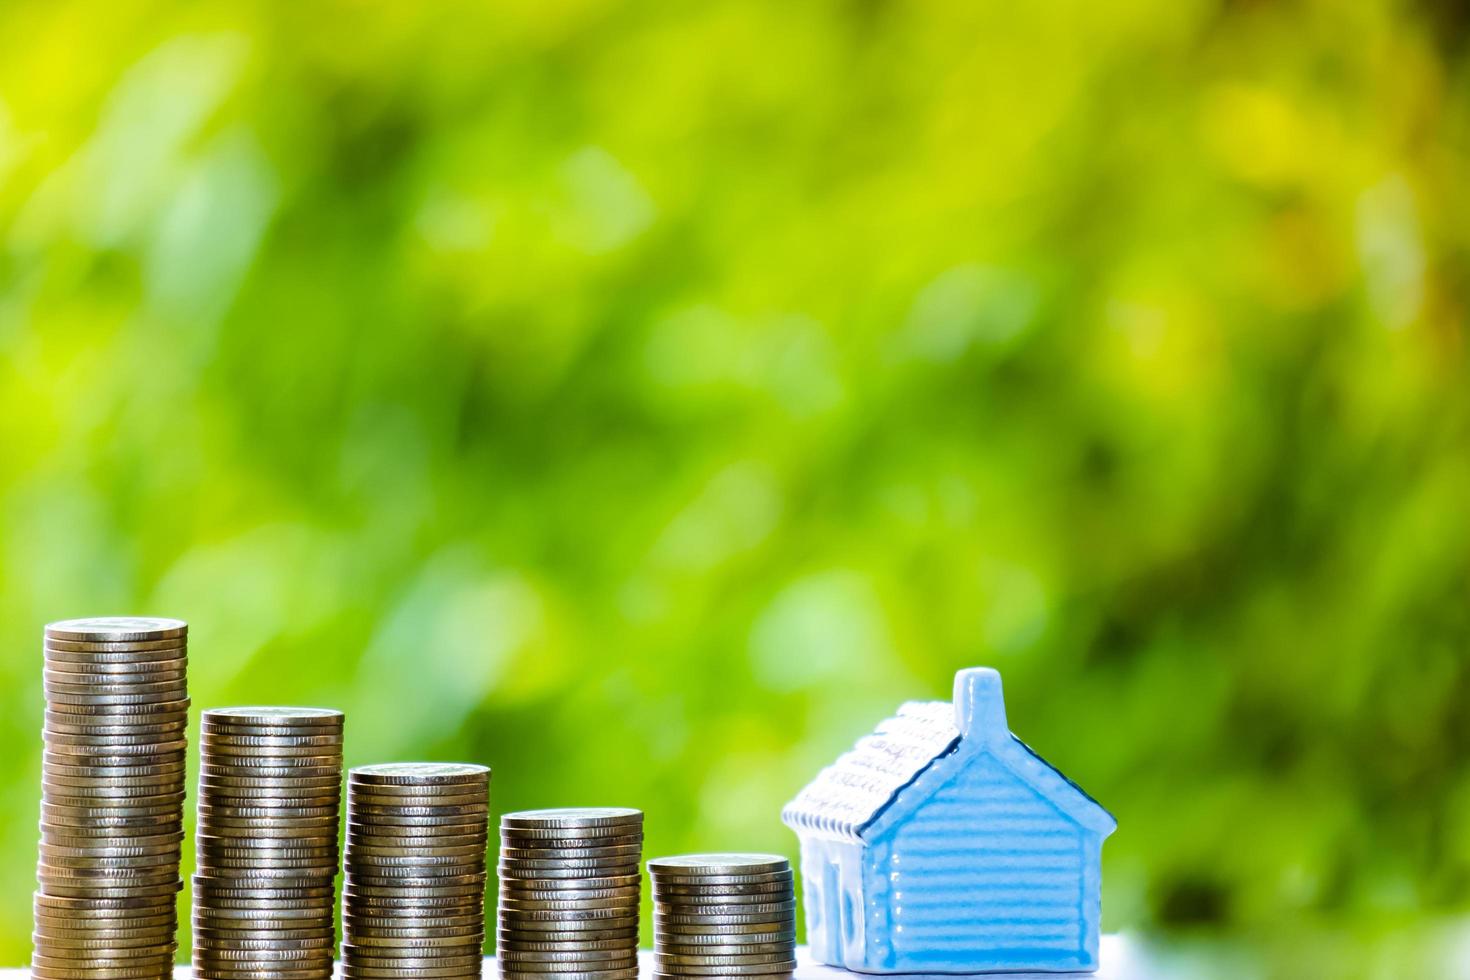 House model and coins money, Business Finance coin stack growing graph with green tree bokeh background,investment, loans and real estate concept photo